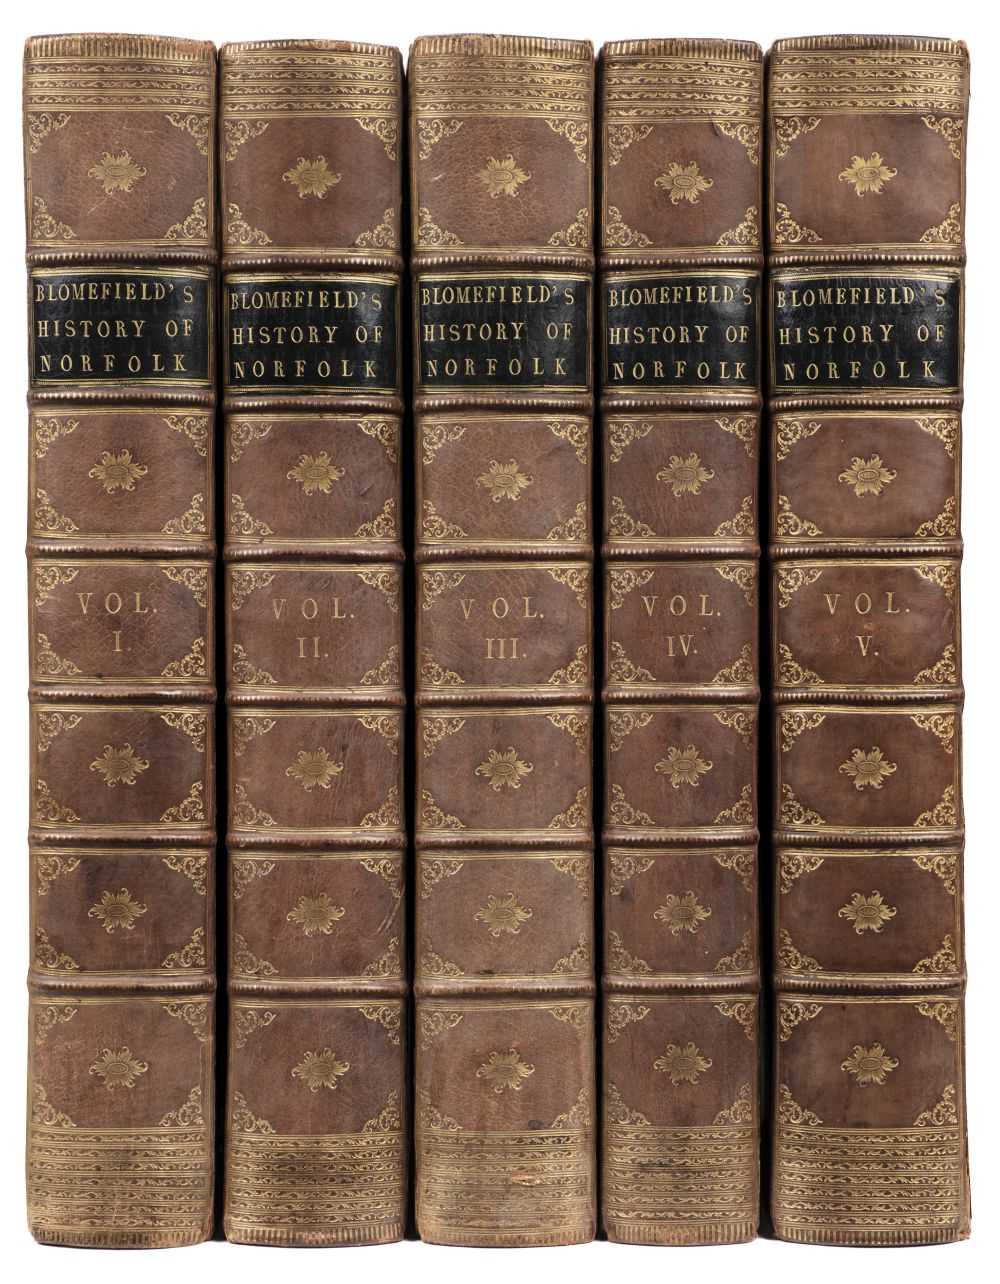 Lot 130 - Blomefield (Francis). An Essay Towards a Topographical History ... of Norfolk, 5 vols., 1739-75